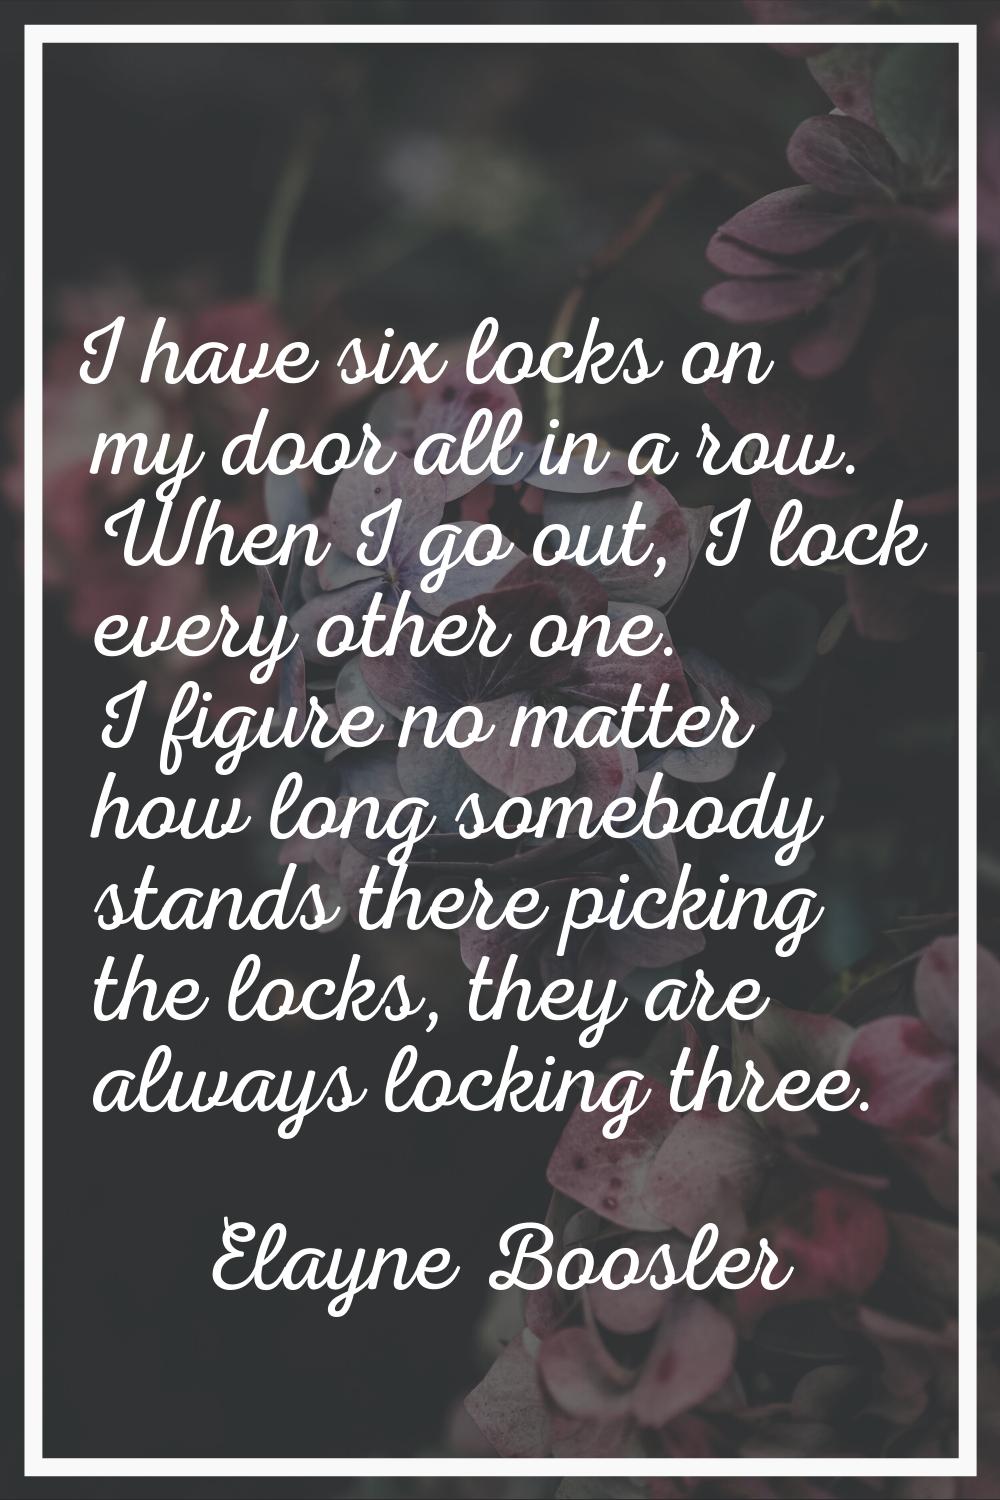 I have six locks on my door all in a row. When I go out, I lock every other one. I figure no matter